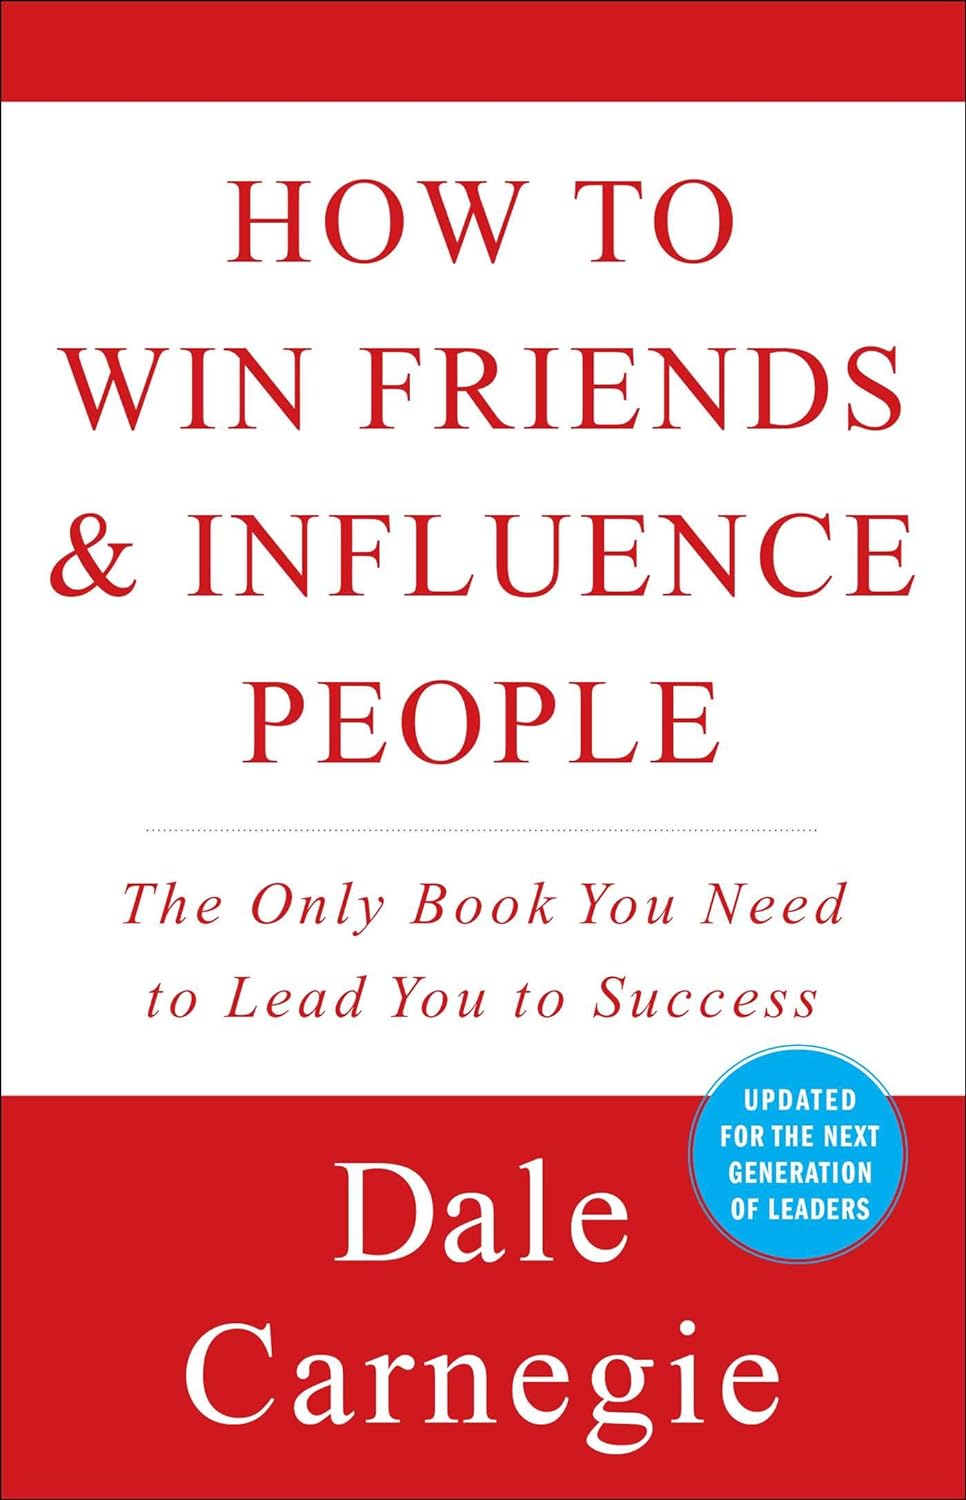 How to Win Friends and Influence People by Dale Carnegie.jpg